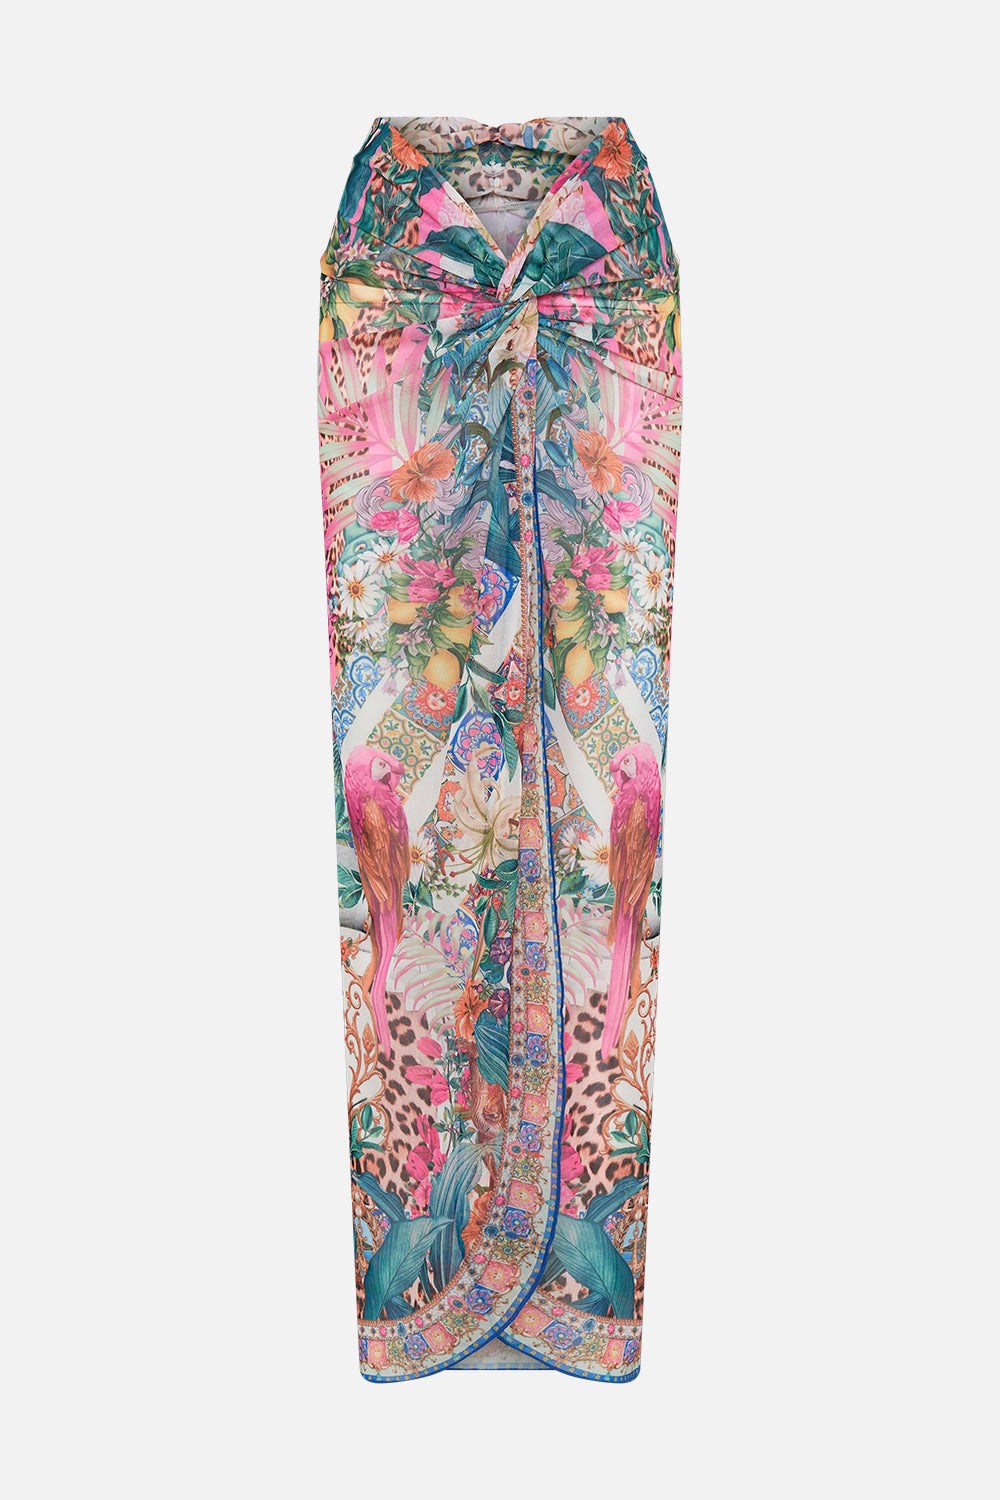 CAMILLA TWIST FRONT LONG SKIRT - FLOWERS OF NEPTUNE - ESCAPE CLOTHING